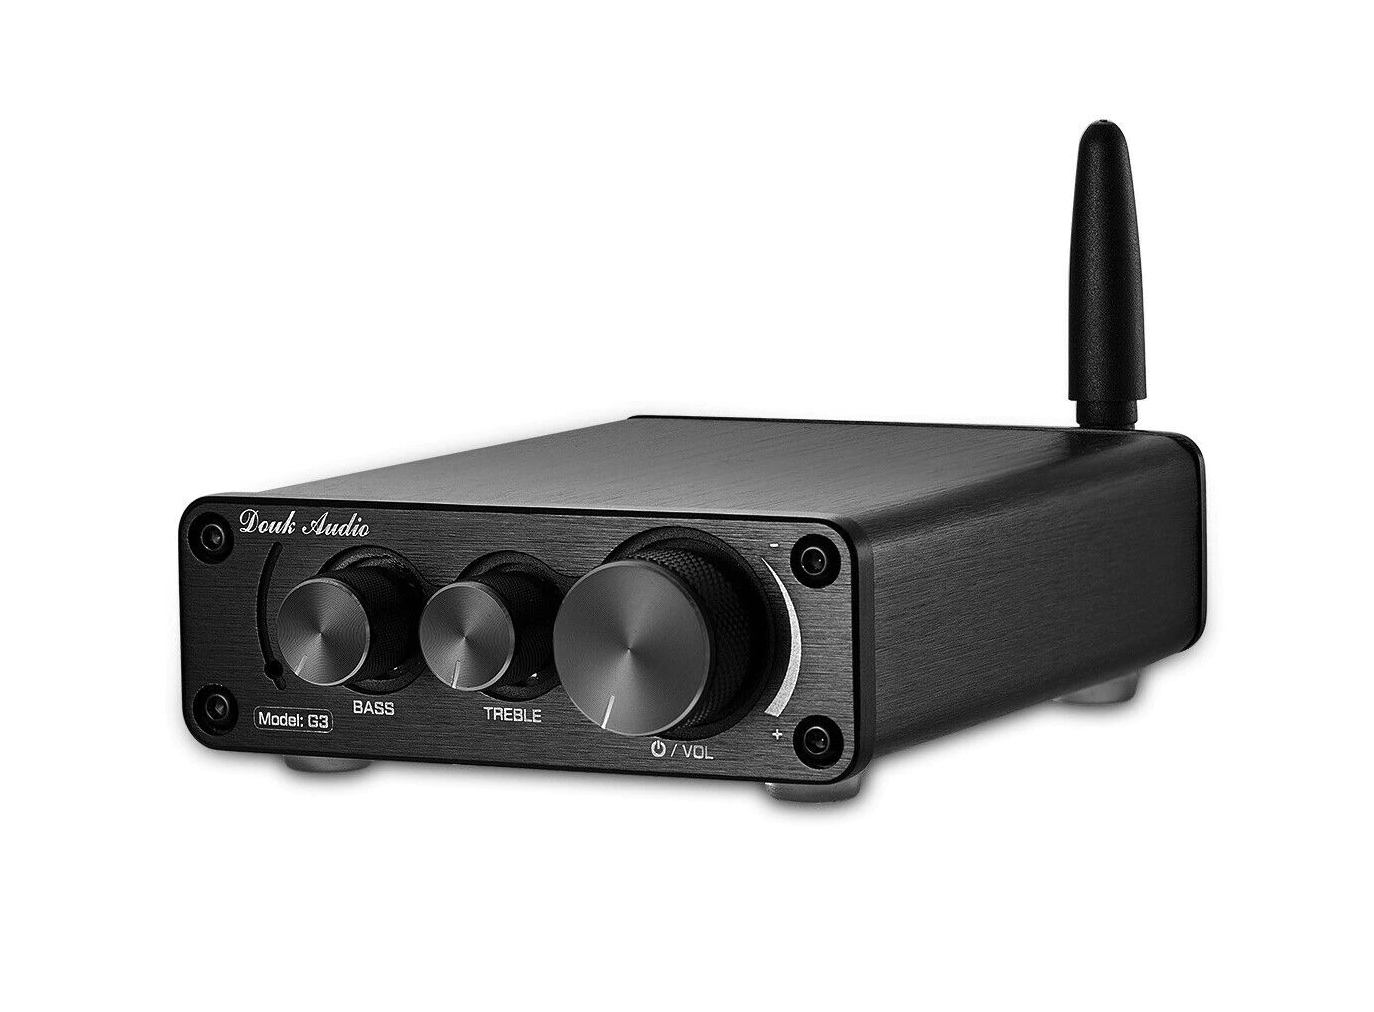 Mini TPA3116-G3 | Bluetooth 5.0 | Hi-Fi Stereo Amplifier with Treble and Bass